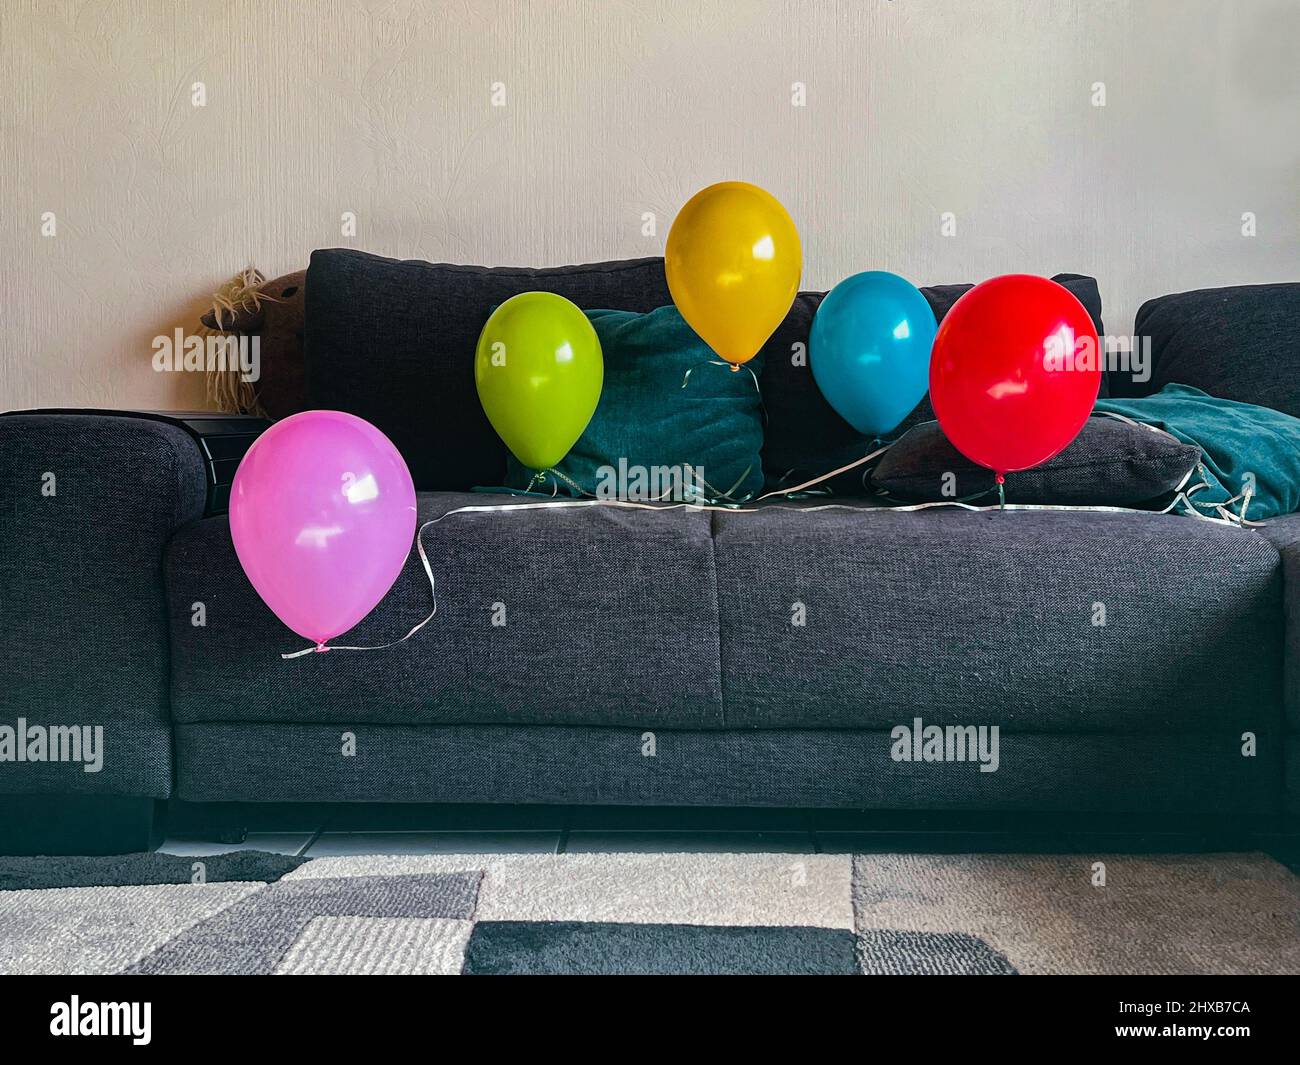 Five balloons on the couch Stock Photo